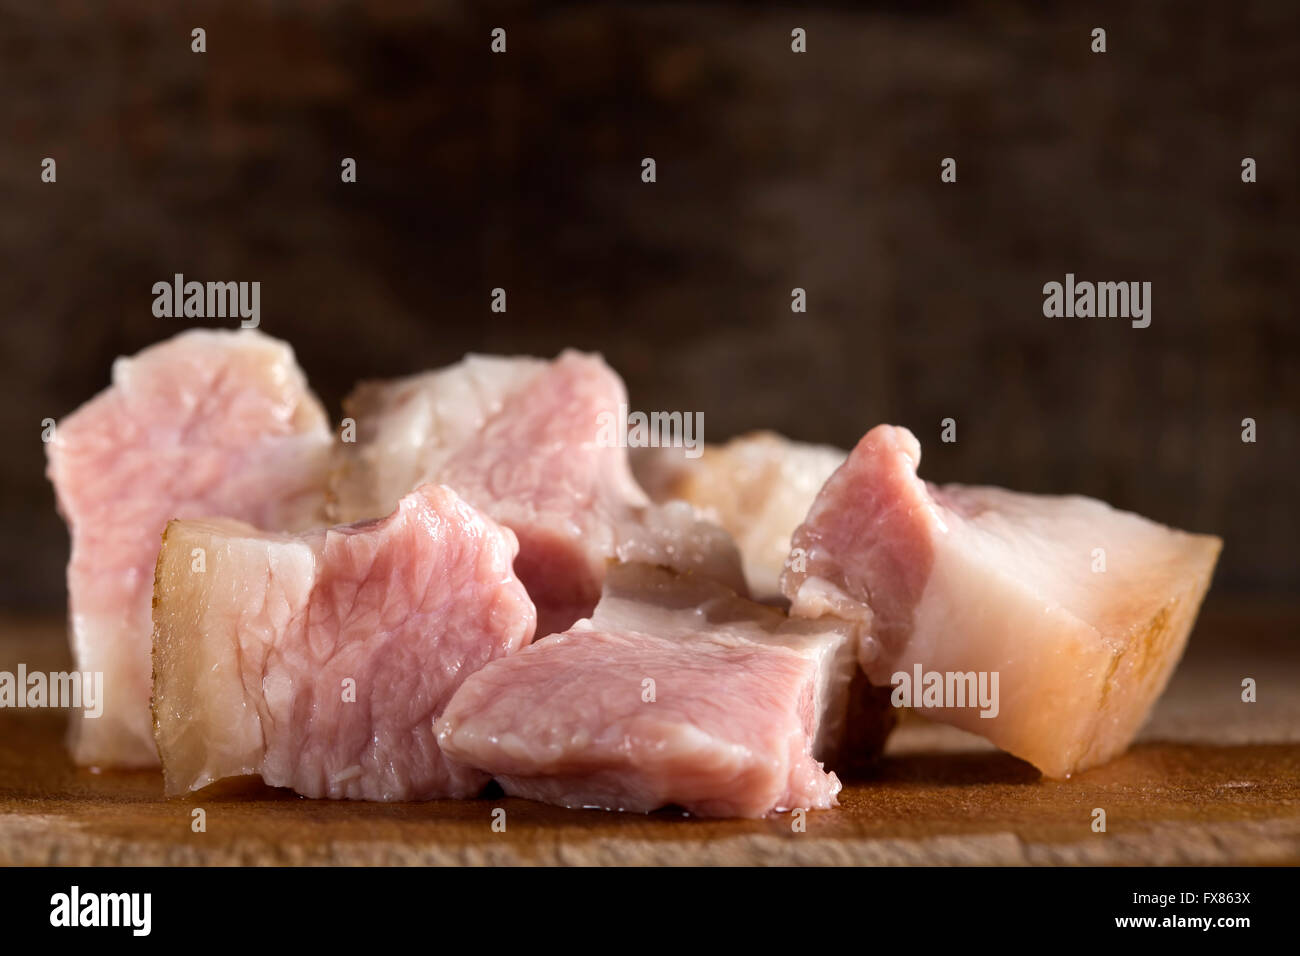 Heap of fat pieces raw pork on wooden background Stock Photo